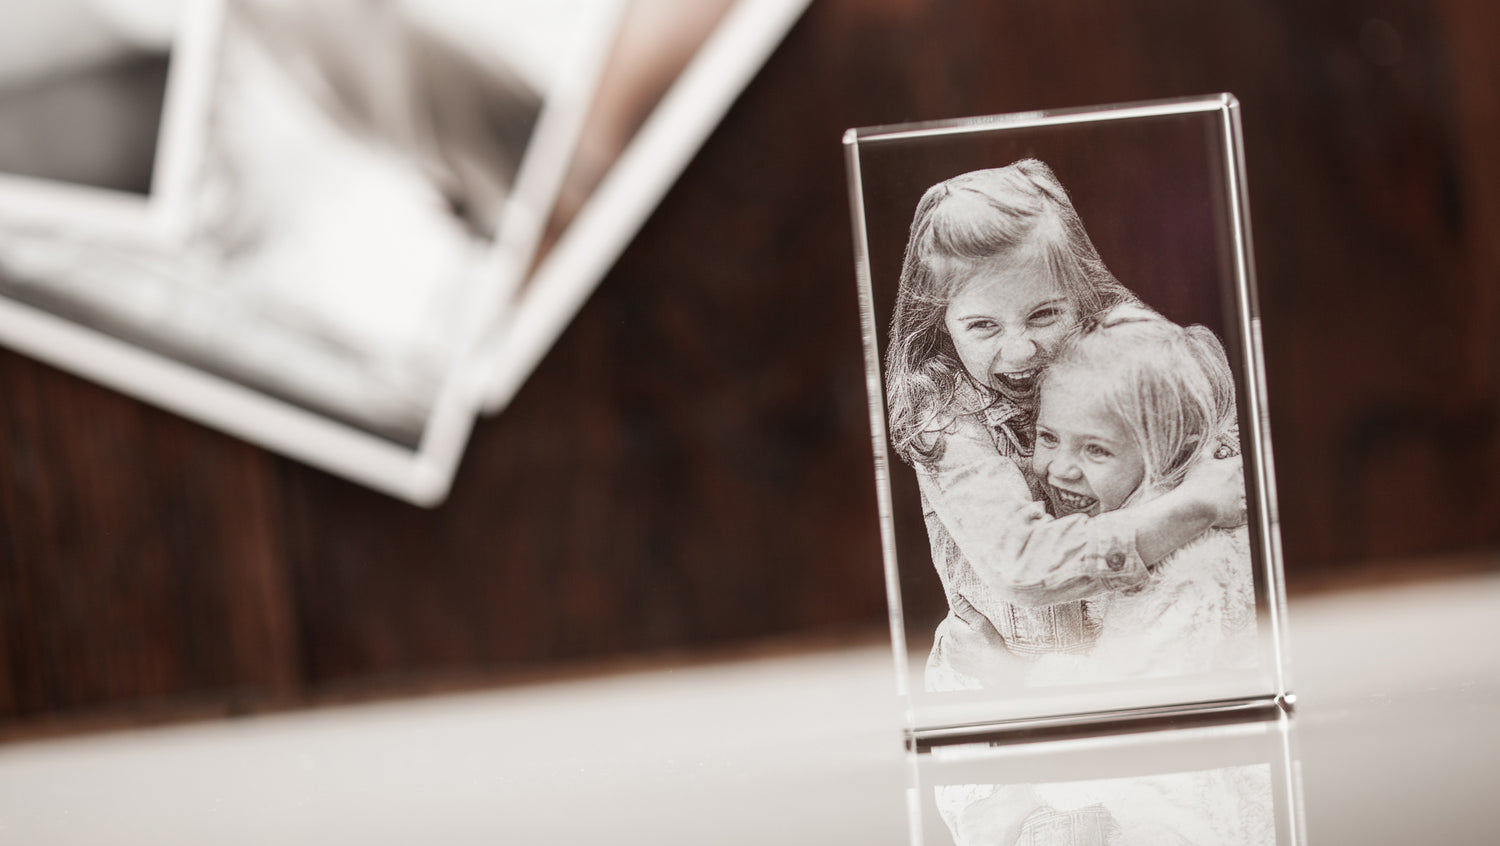 3D photo crystals can be of family, the grandkids or a beloved pet. We can even do objects and architecture.